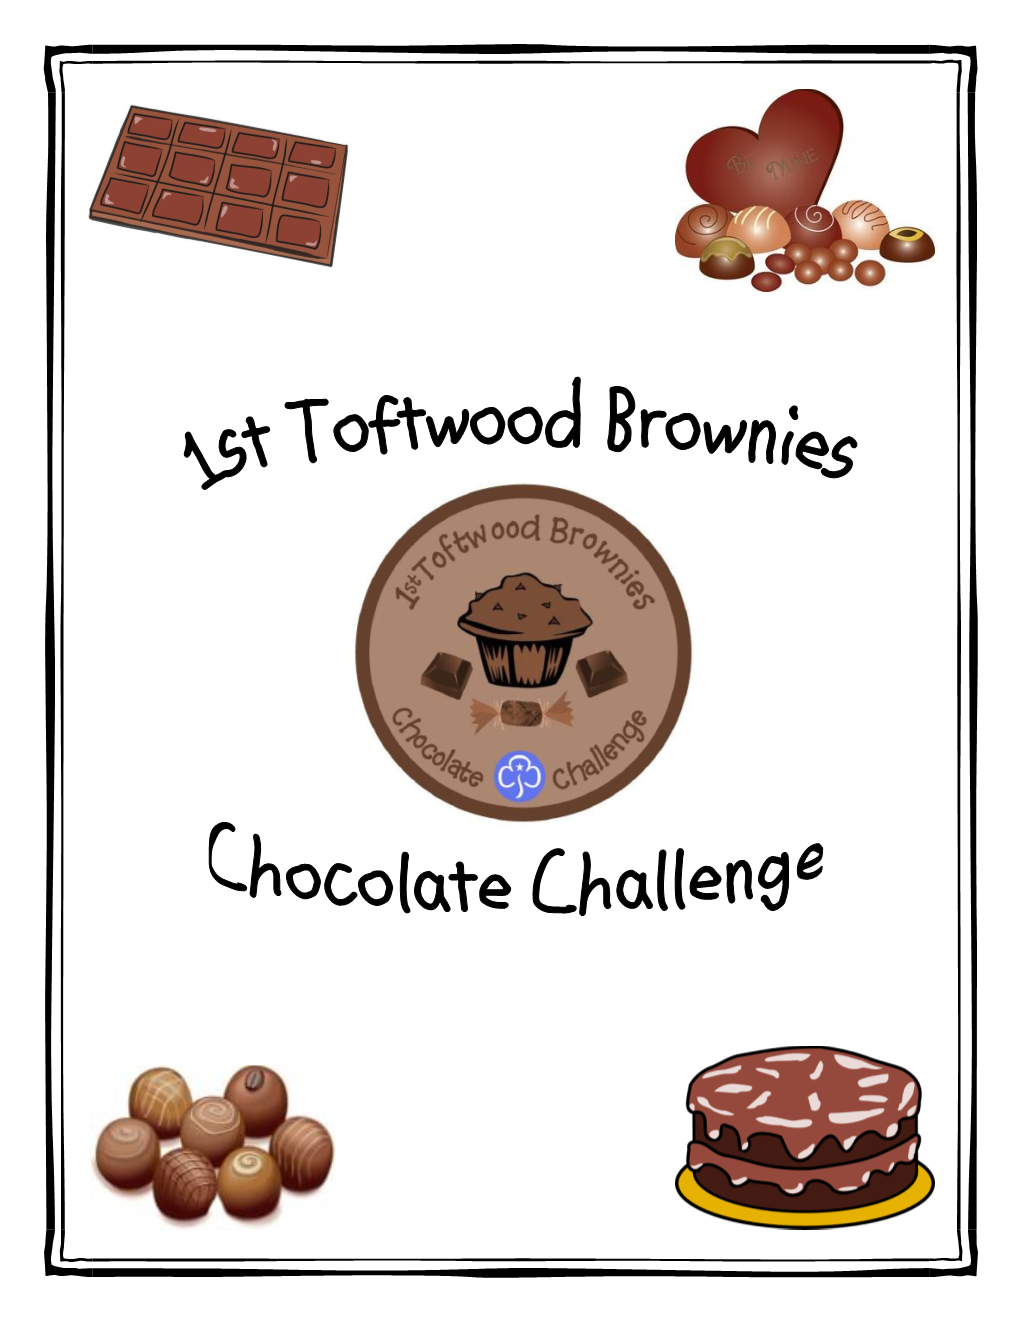 The 1St Toftwood Brownies - Chocolate Challenge